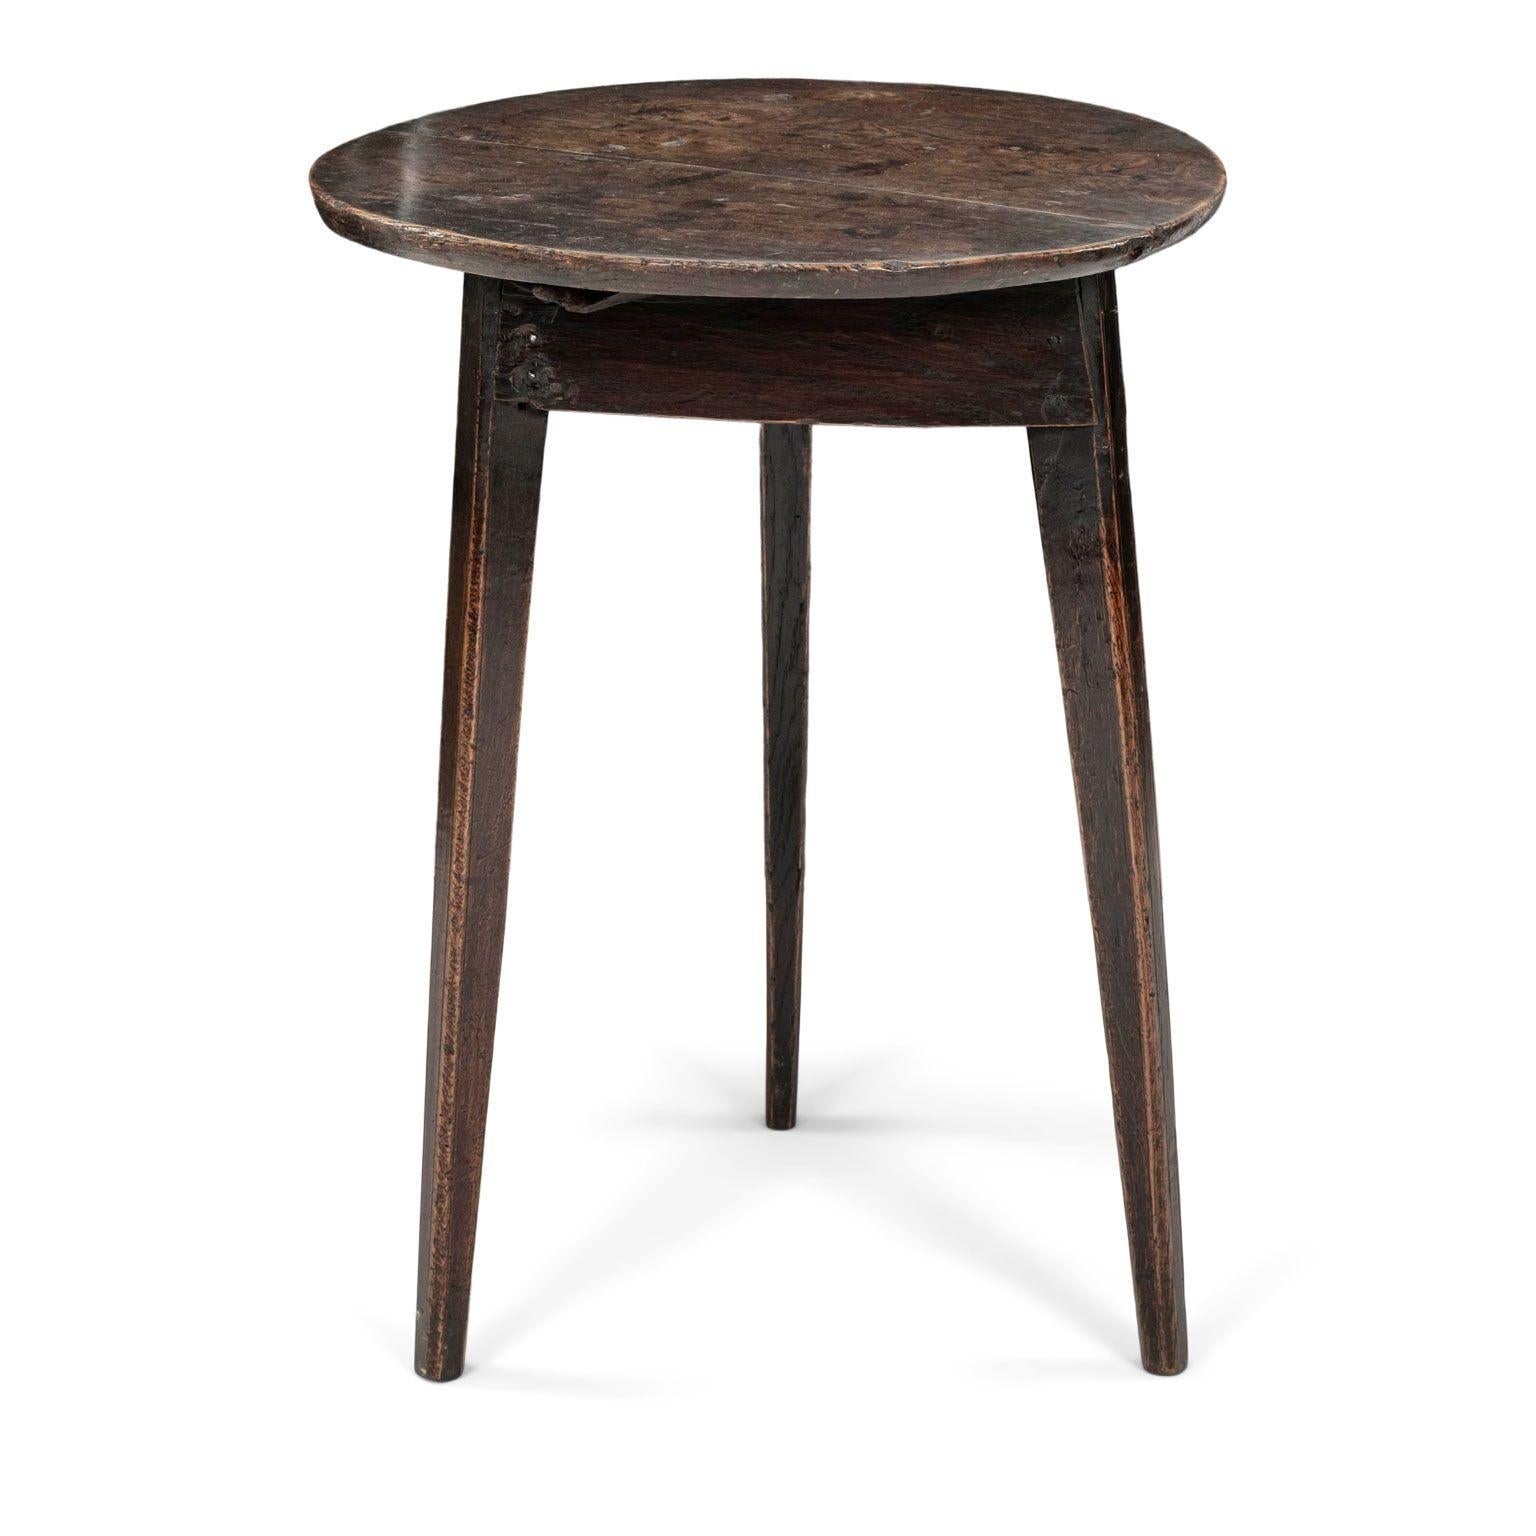 English elm cricket table circa 1780-1800. Dark brown elm and pine cricket with round top raised upon three tapered legs. Gorgeous mottled patina.